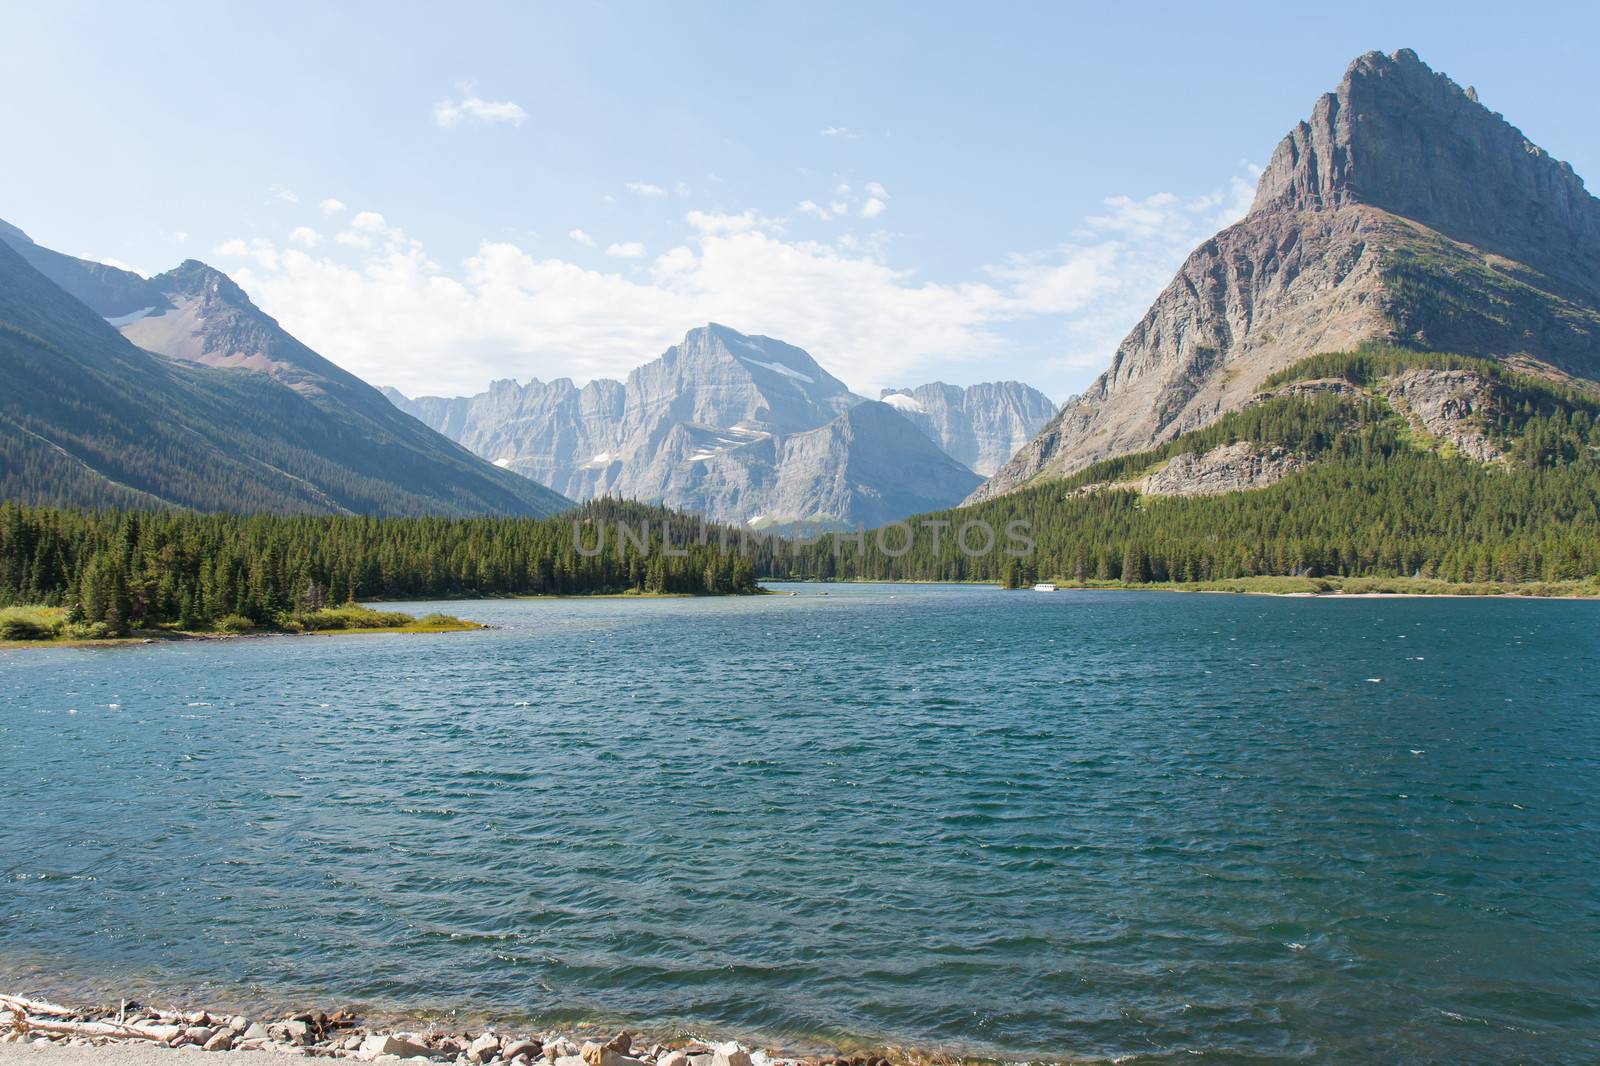 Swiftcurrent Lake is behind the Many Glaciers Hotel in Glacier National Park. The mountain in the center is Mt Gould which is a peak on the continental divide. 